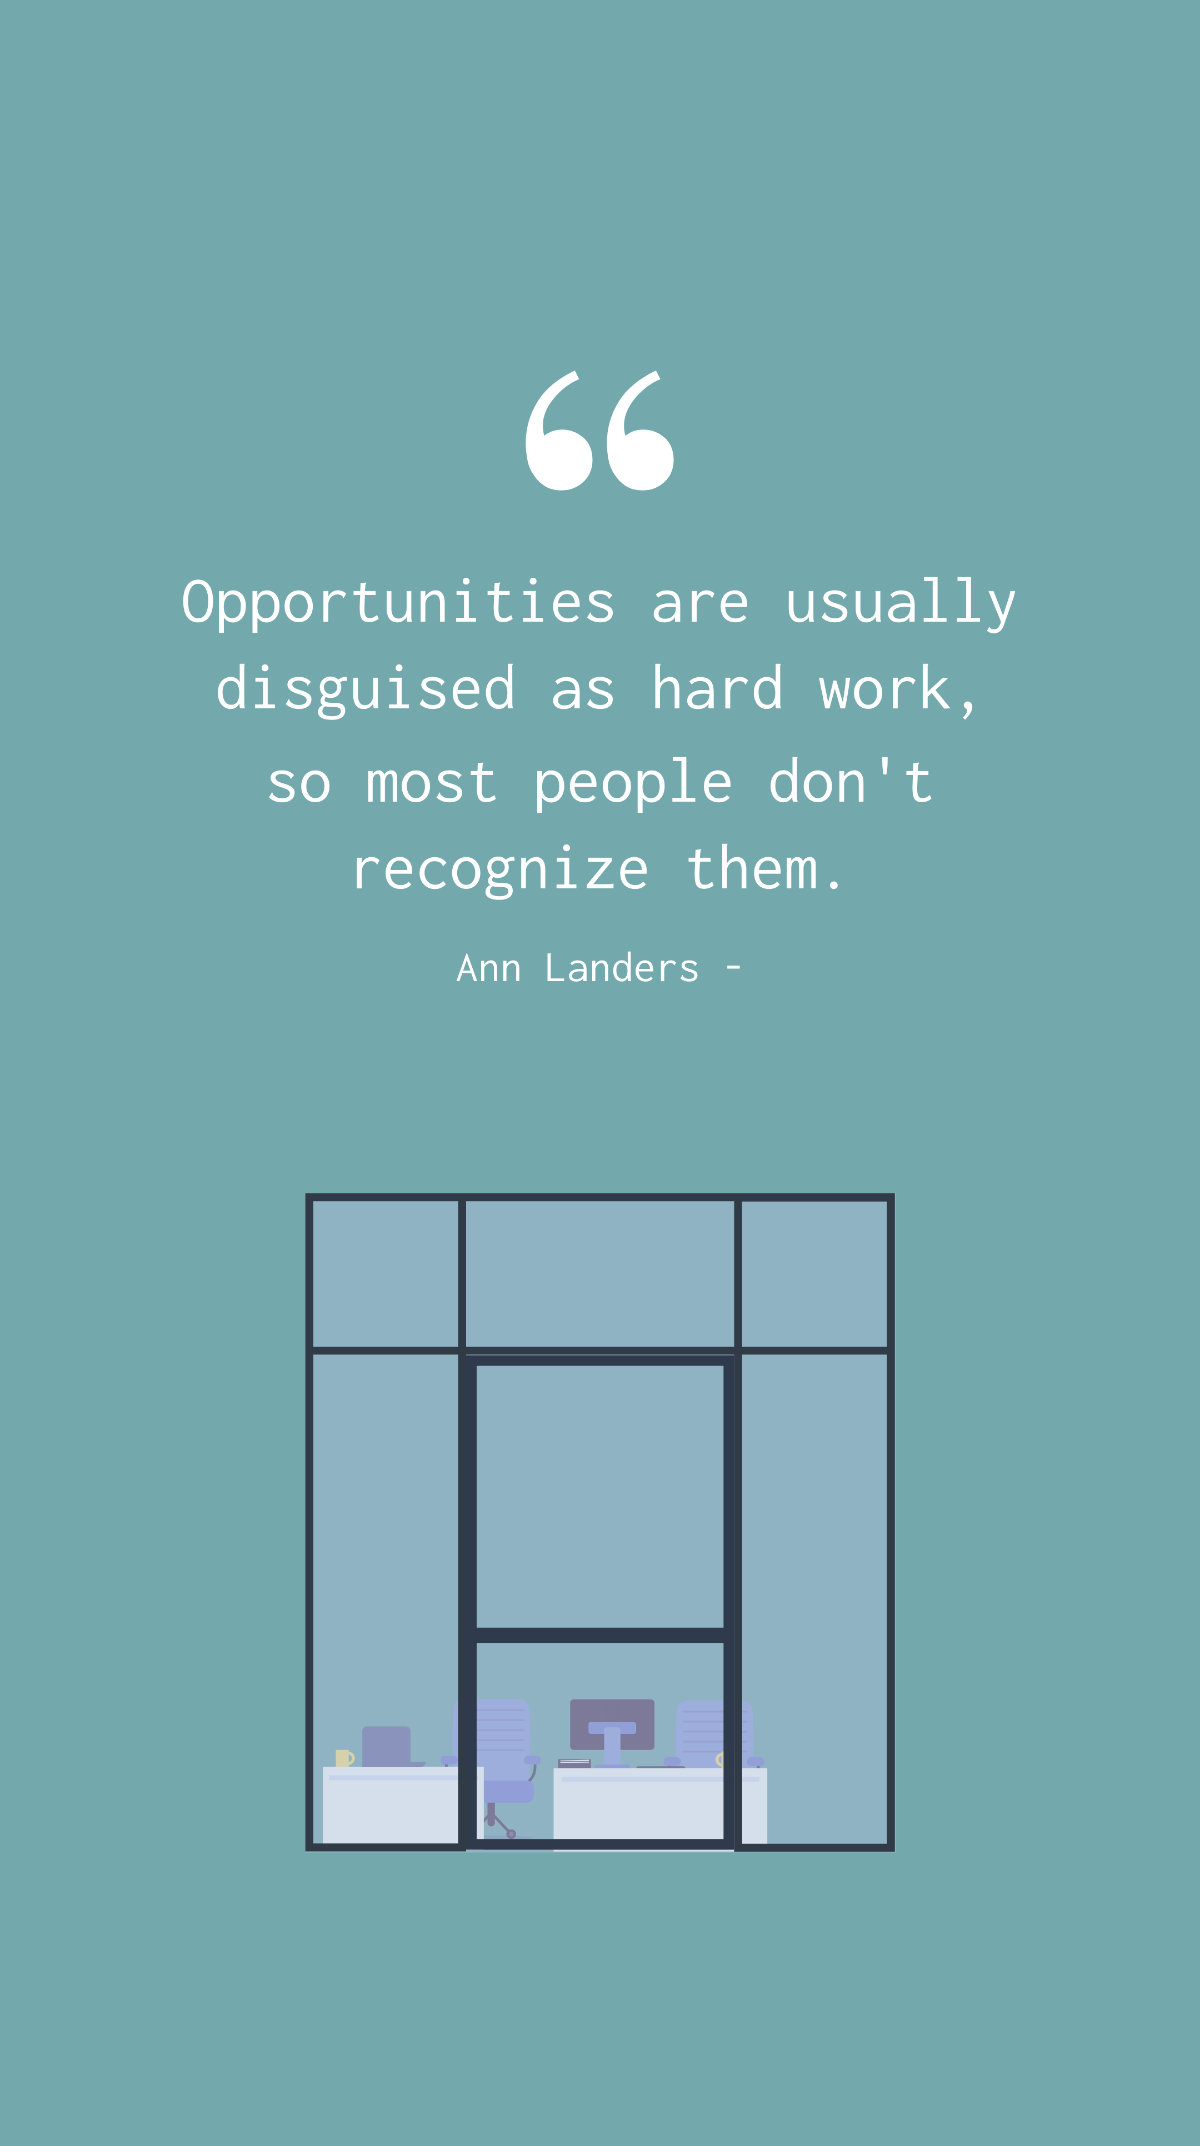 Free Ann Landers - Opportunities are usually disguised as hard work, so most people don't recognize them. Template